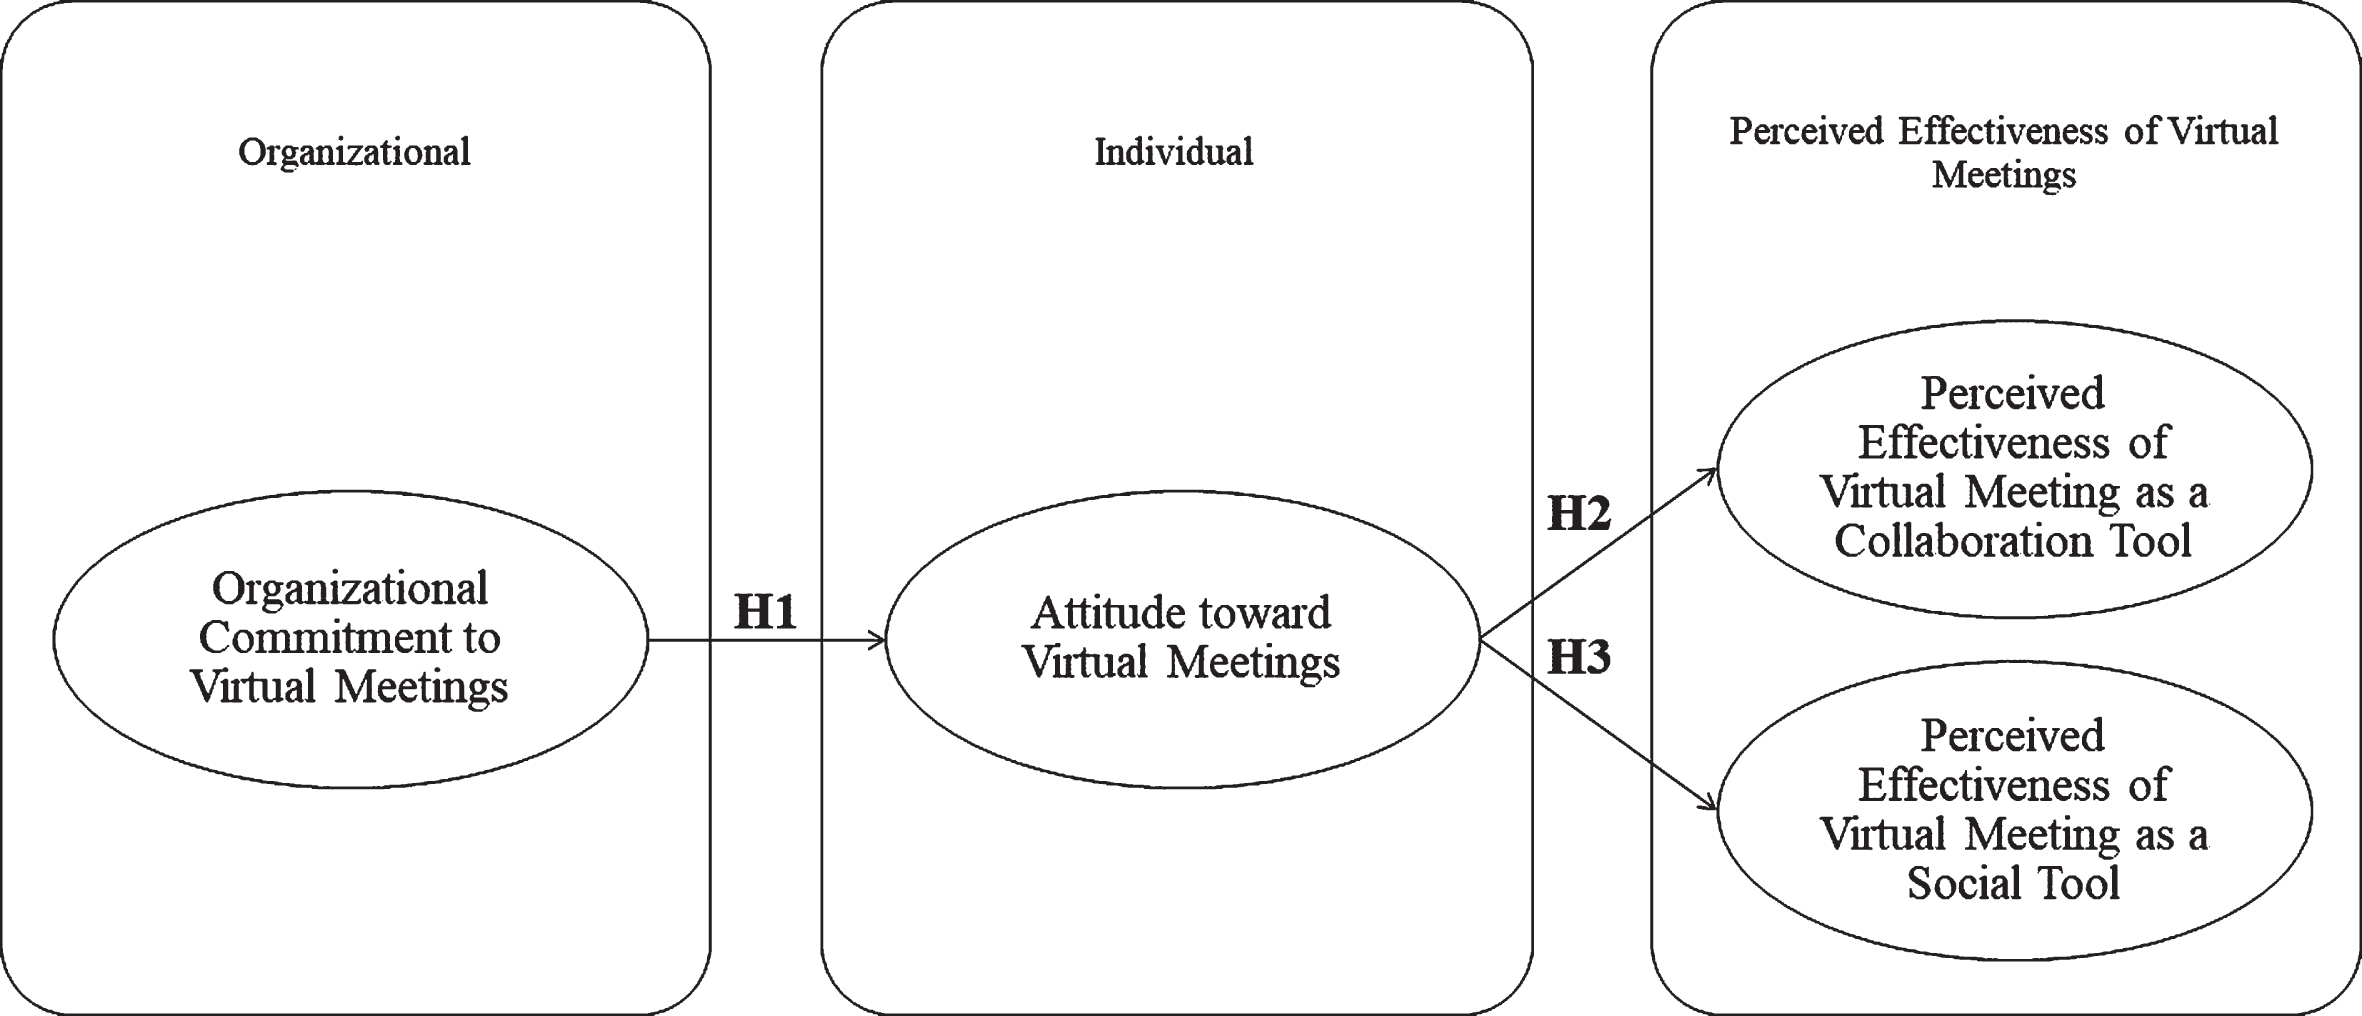 The research model and hypotheses construct.